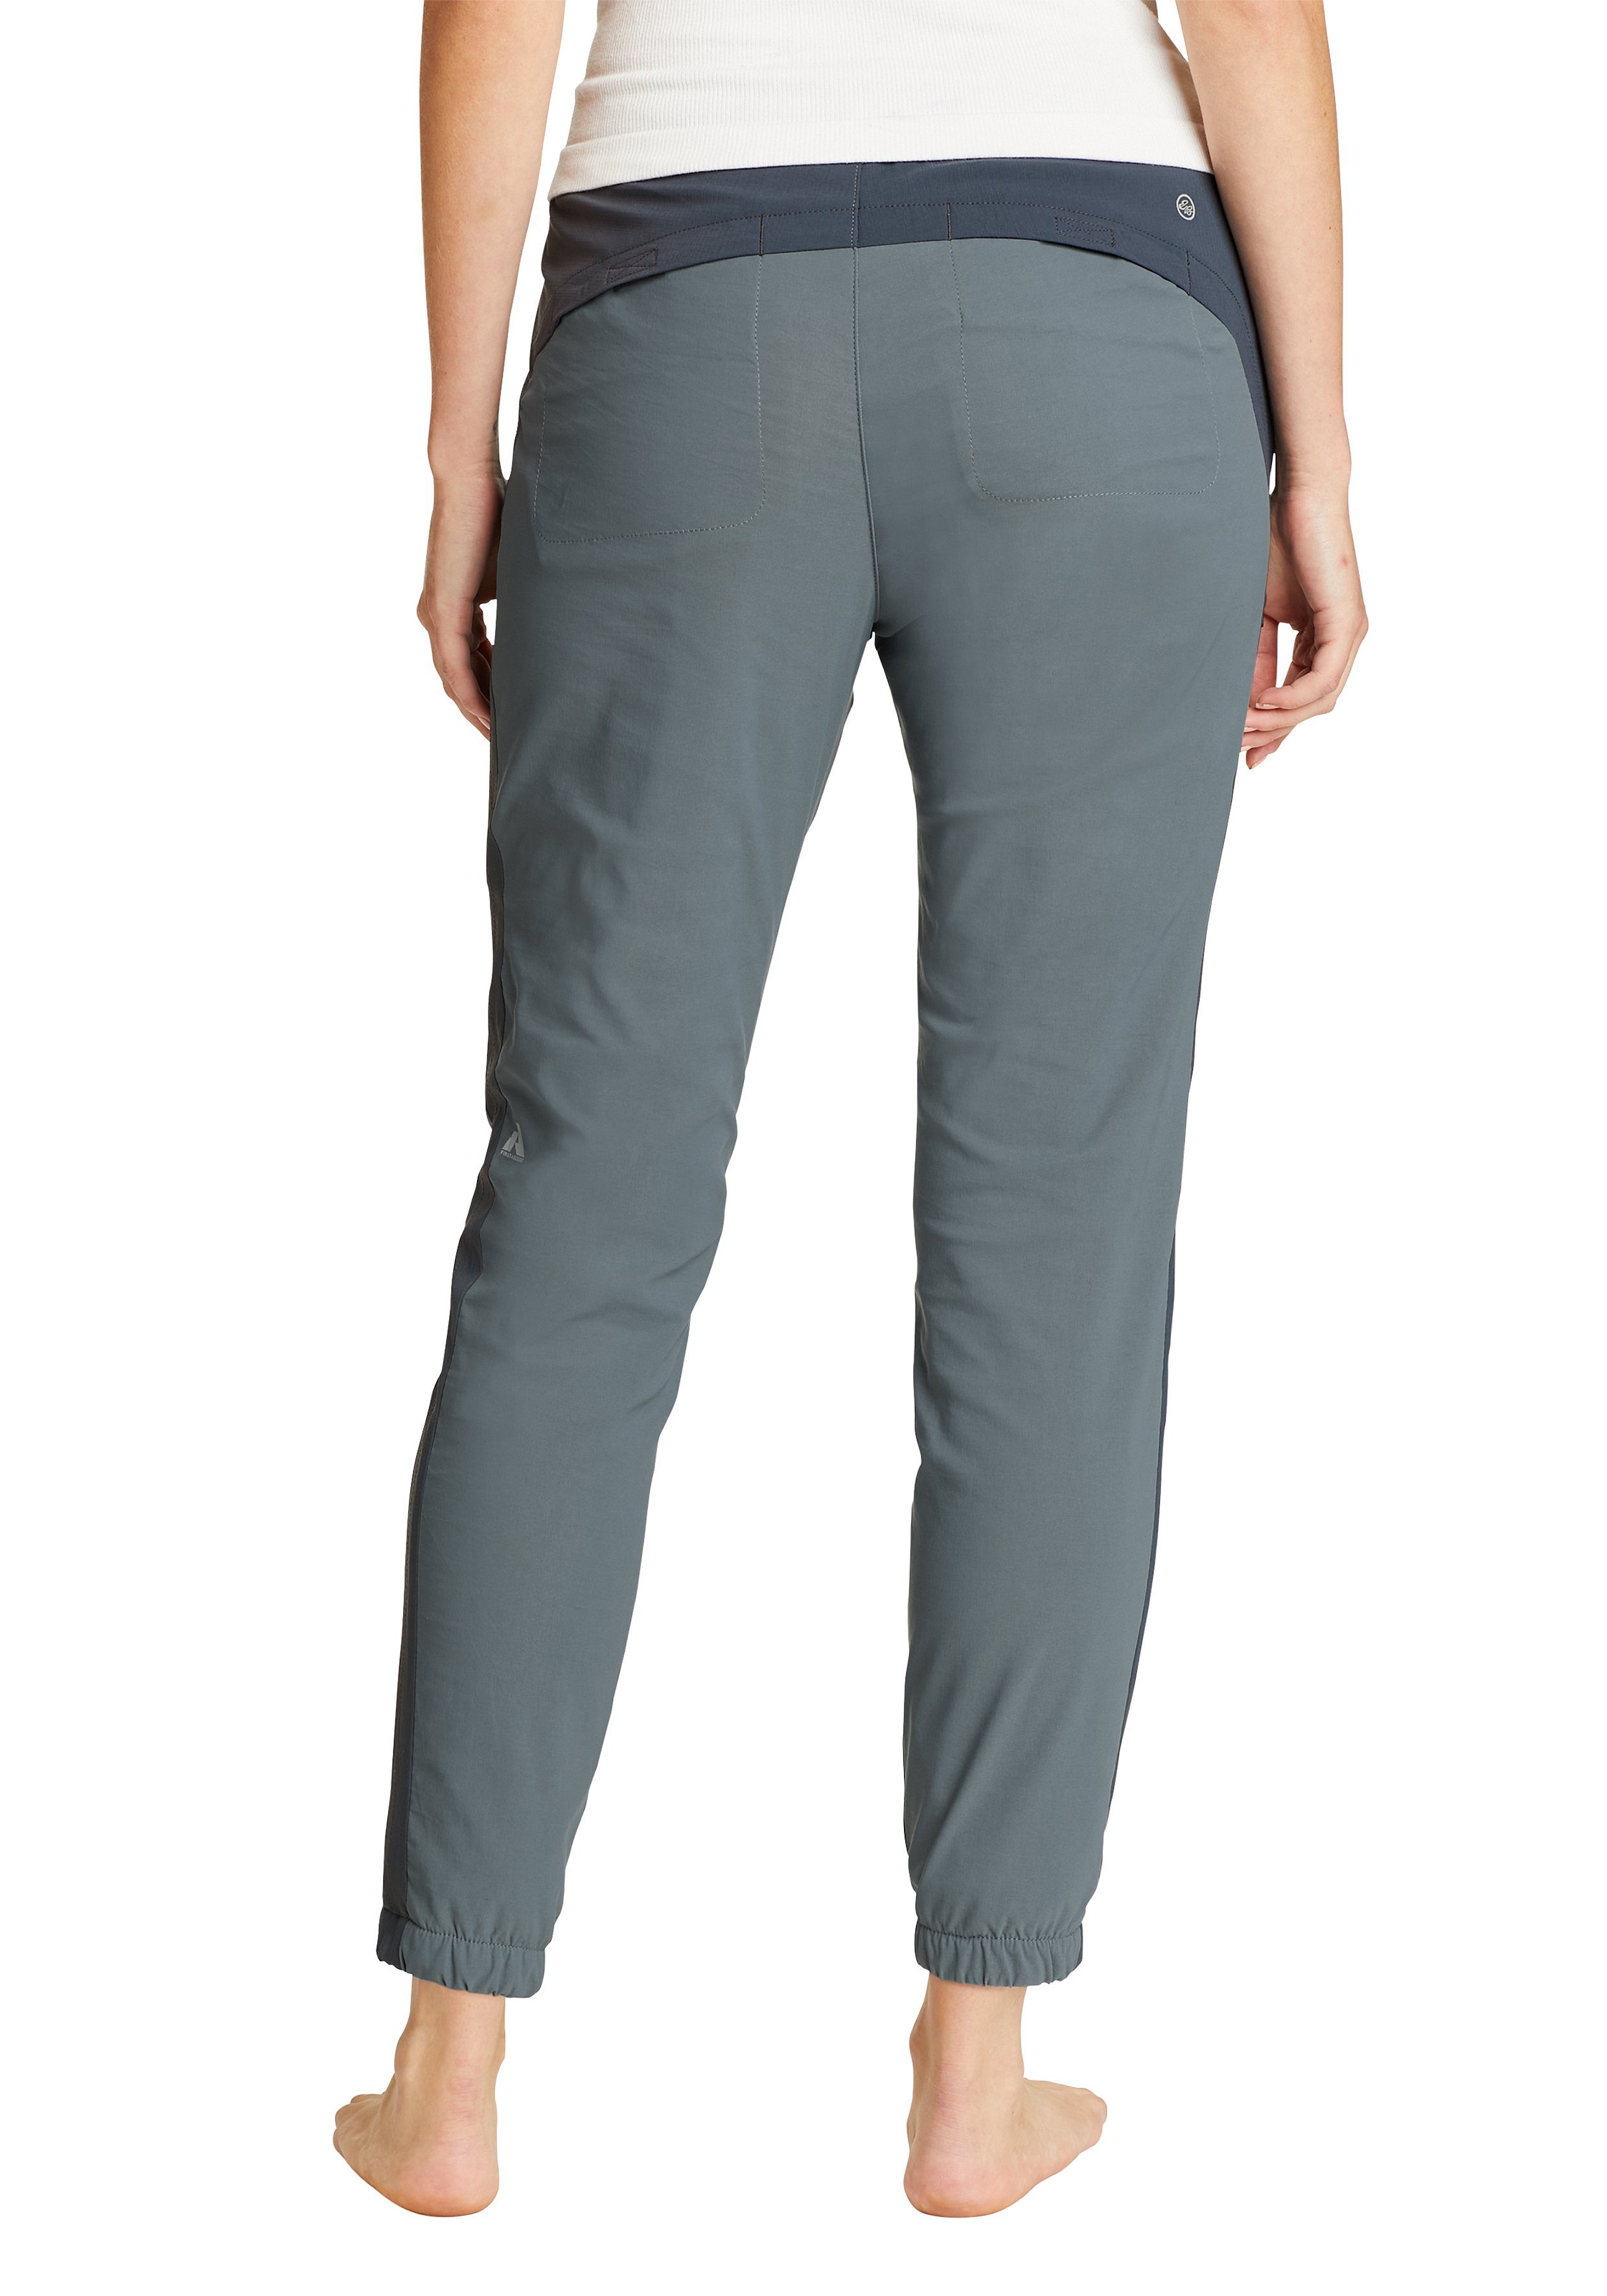 gefüttert Graphit Bauer Eddie Guide Pants - Pro Jogger Jogger Thermo